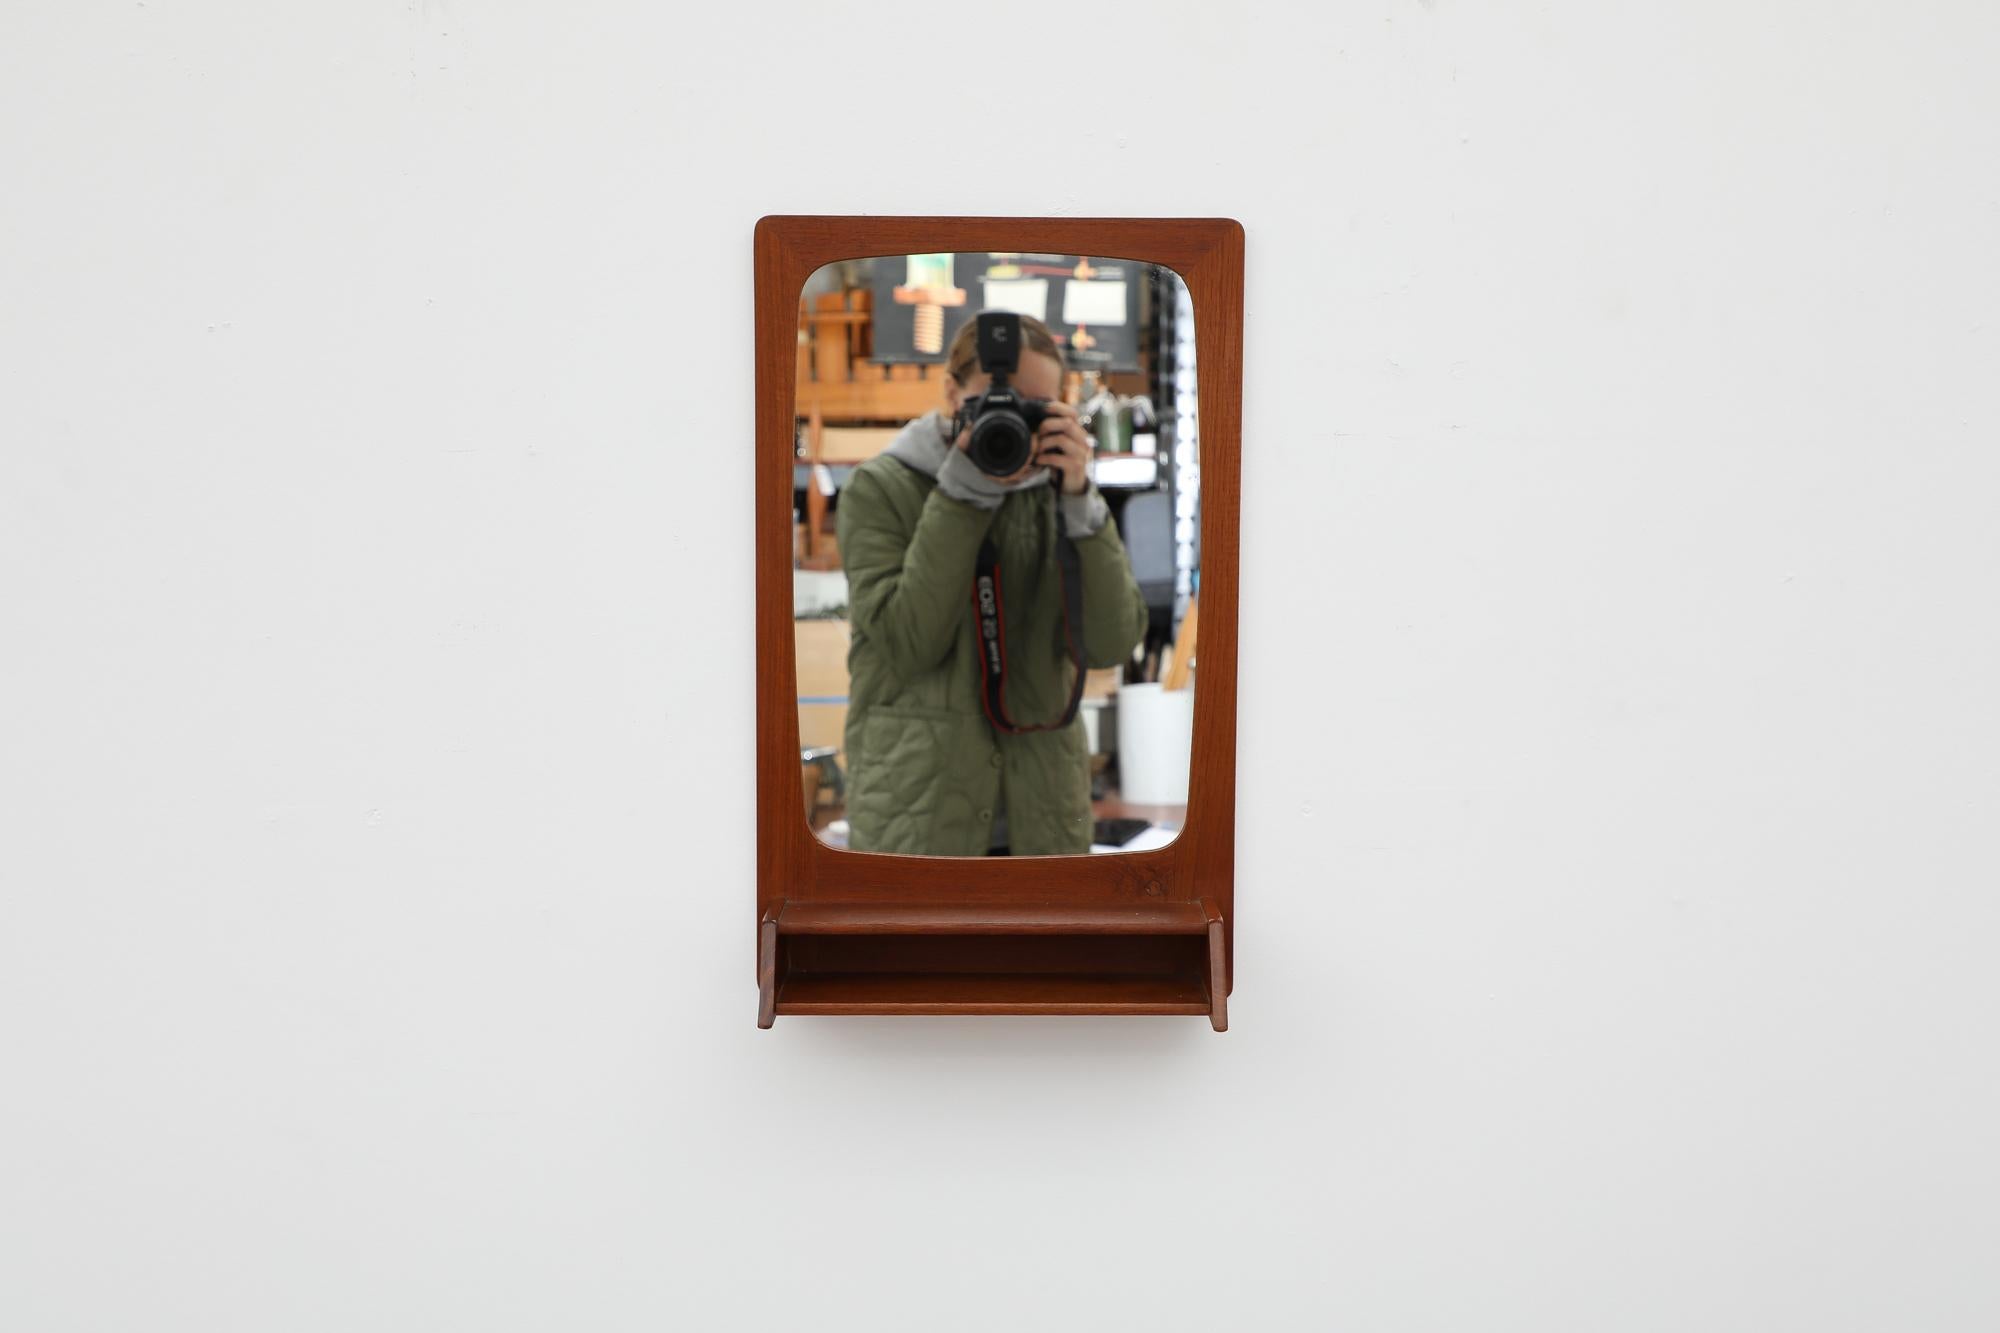 Handsome 1950s or 1960s Danish Wall Mount Teak Mirror with Small Cubby Shelf. Good Original Condition.